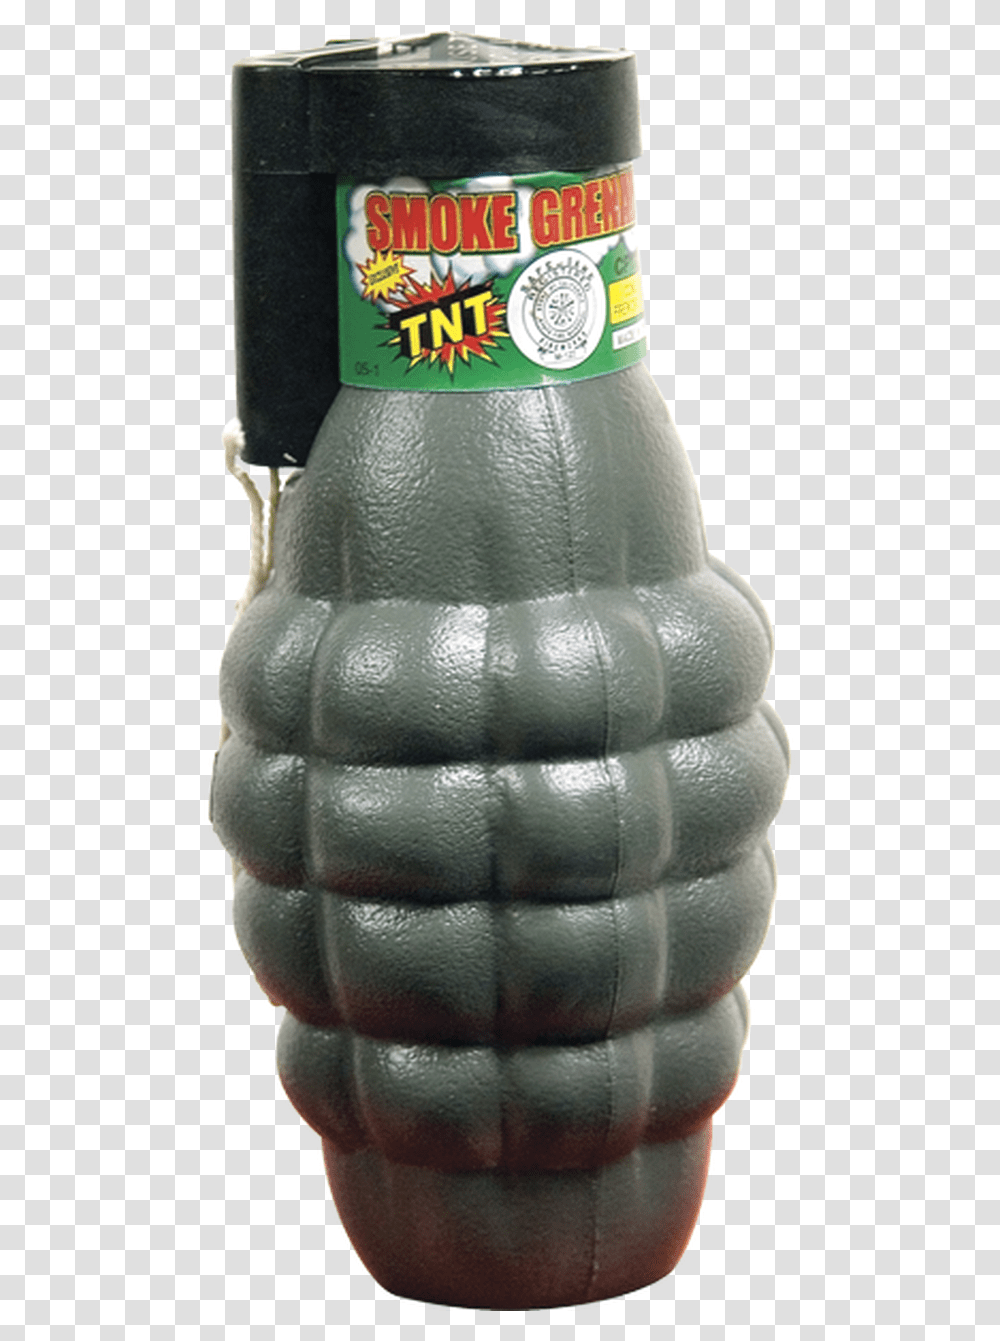 Smoke Bomb Fireworks, Weapon, Weaponry, Grenade Transparent Png